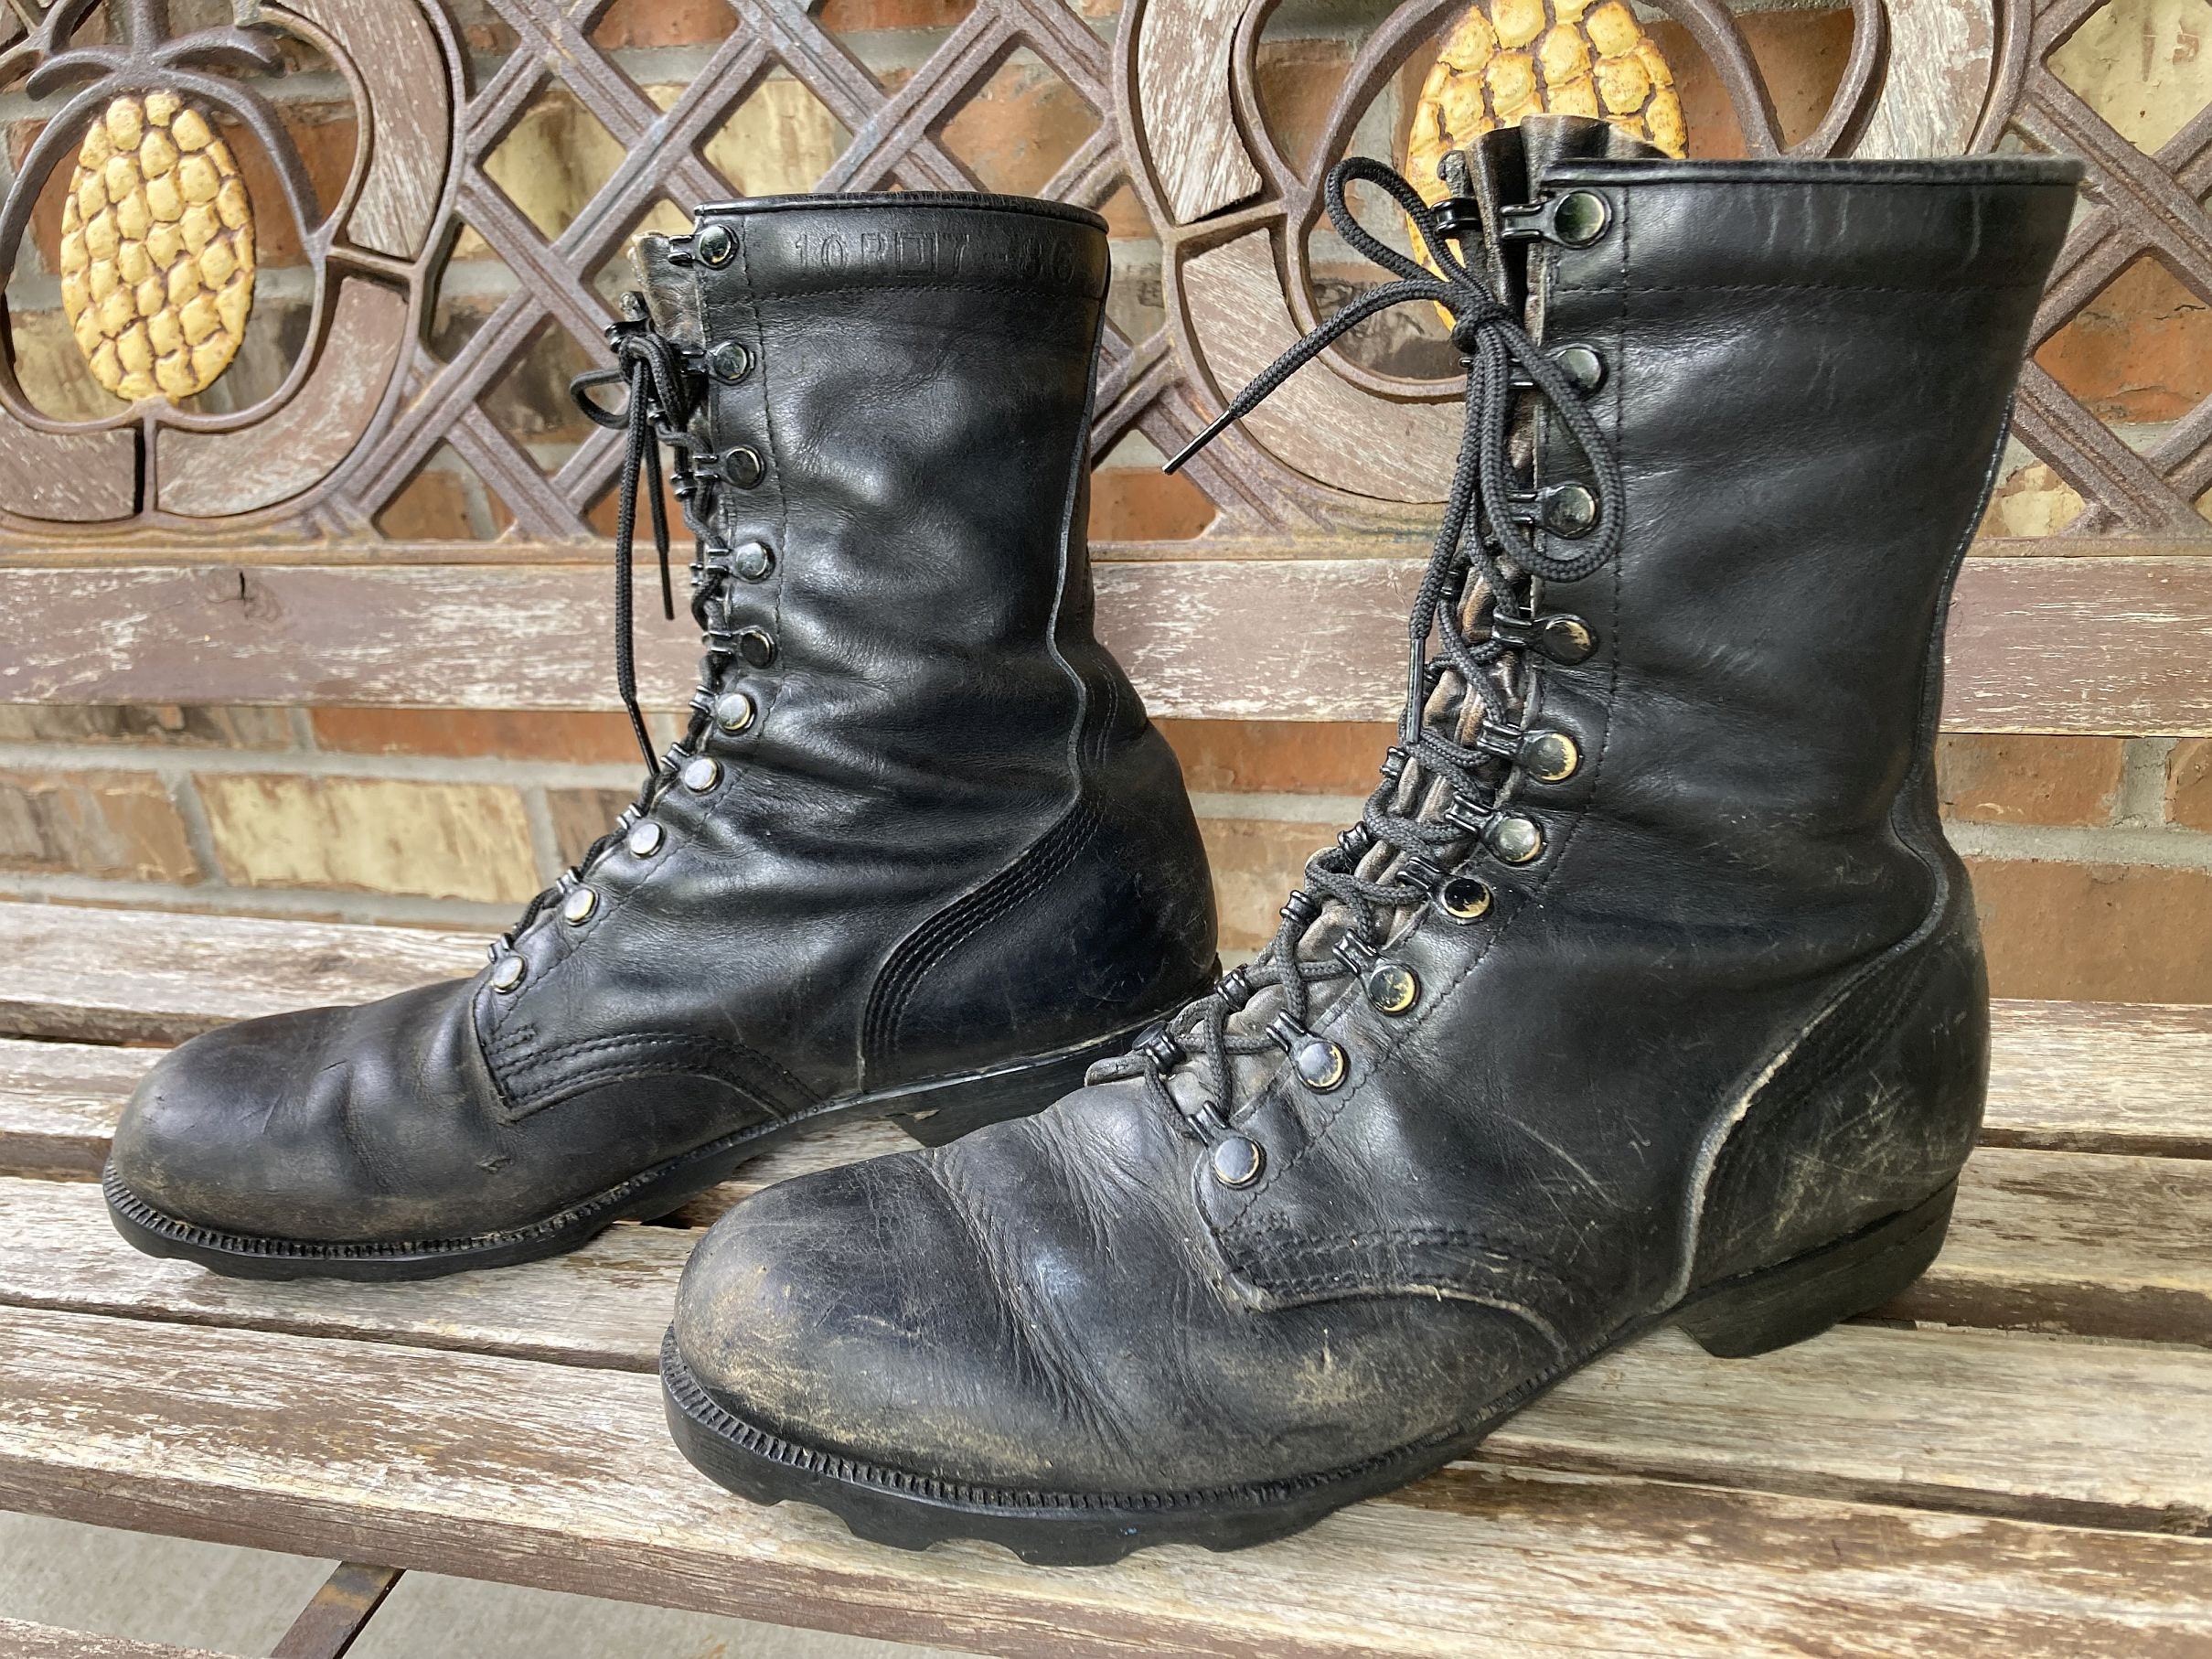 10R 80s 1986 U.S Army Military Black Combat Boots Vintage Lace up